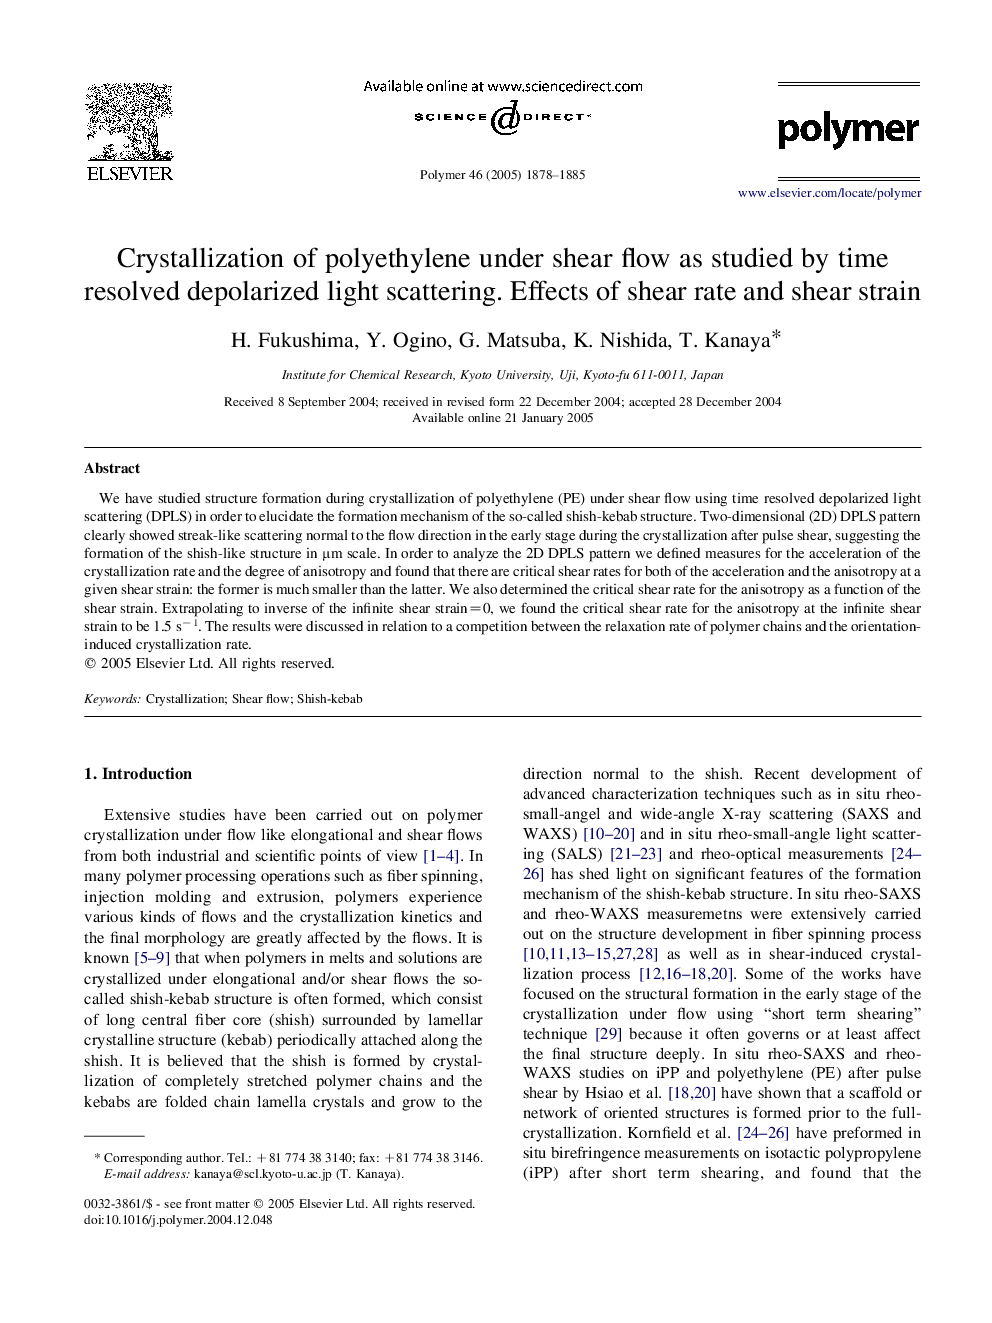 Crystallization of polyethylene under shear flow as studied by time resolved depolarized light scattering. Effects of shear rate and shear strain